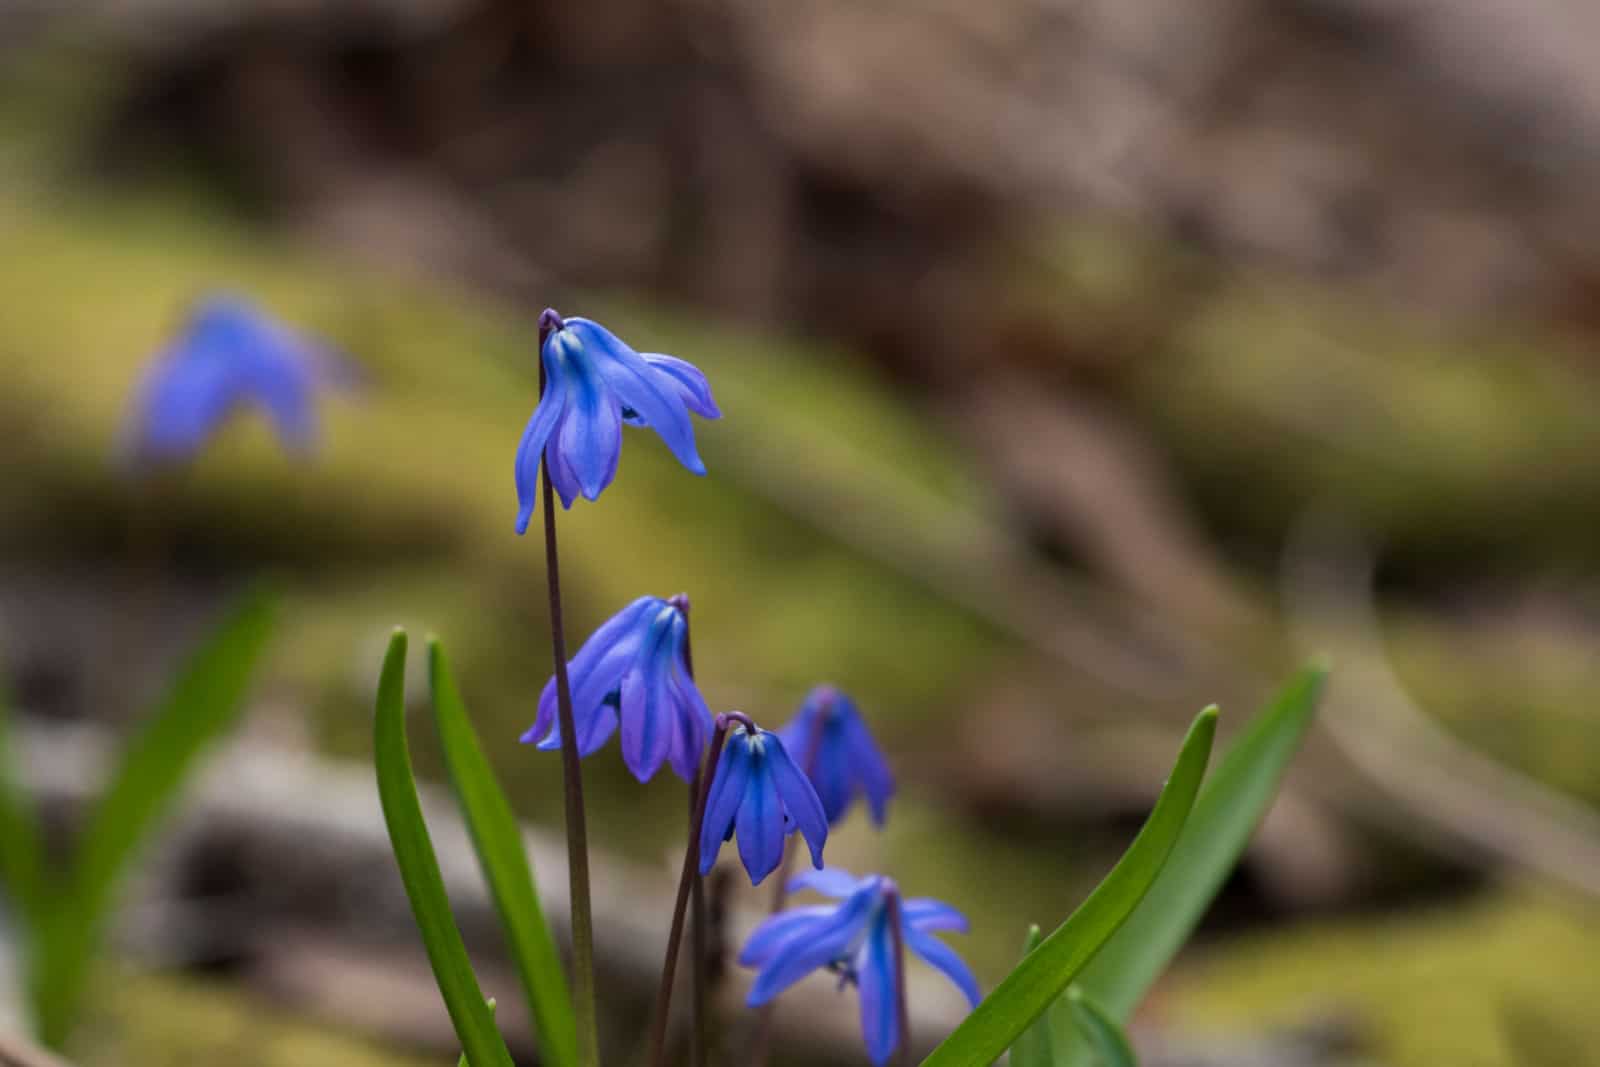 The Siberian squill or wood squill